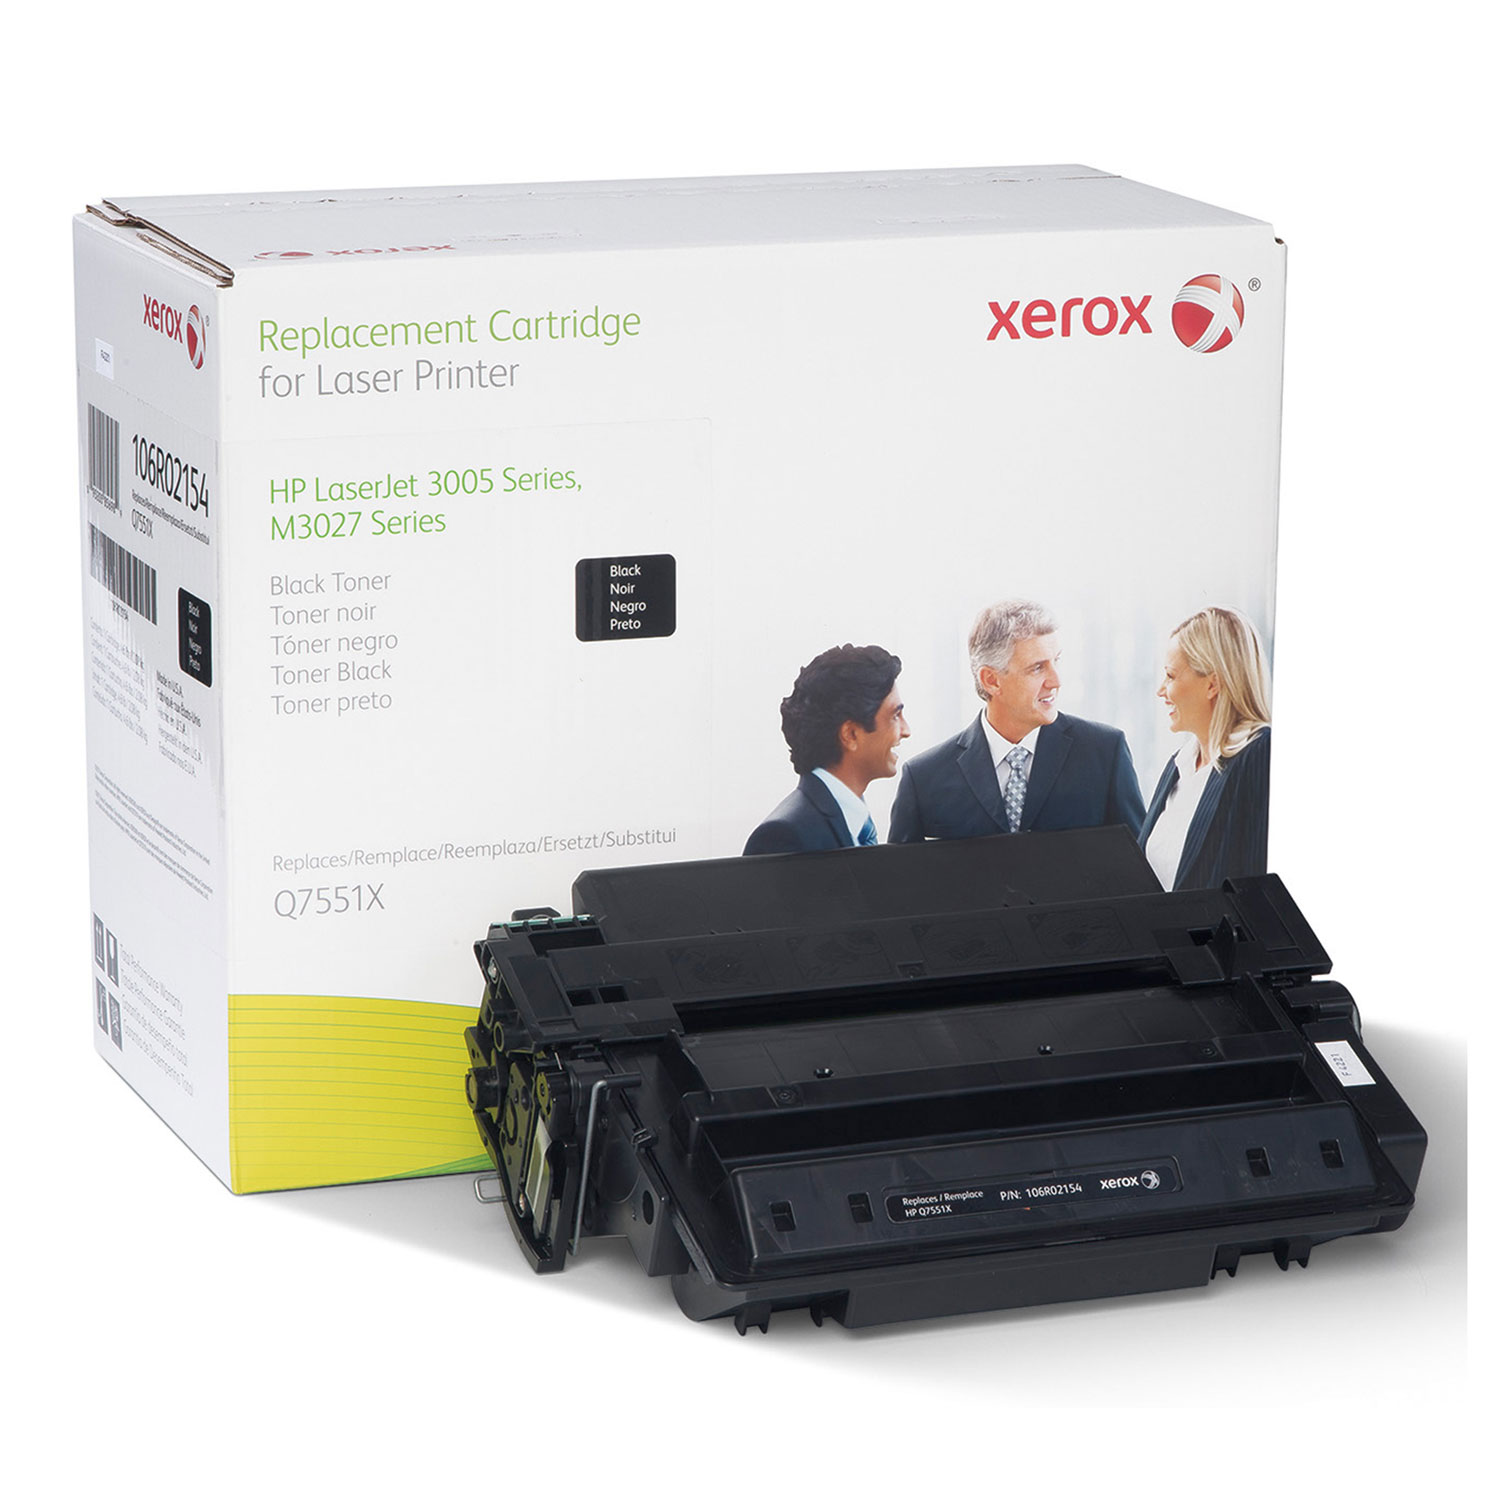  Xerox 106R02154 106R02154 Replacement Extended-Yield Toner for Q7551X (51X), Black (XER106R02154) 